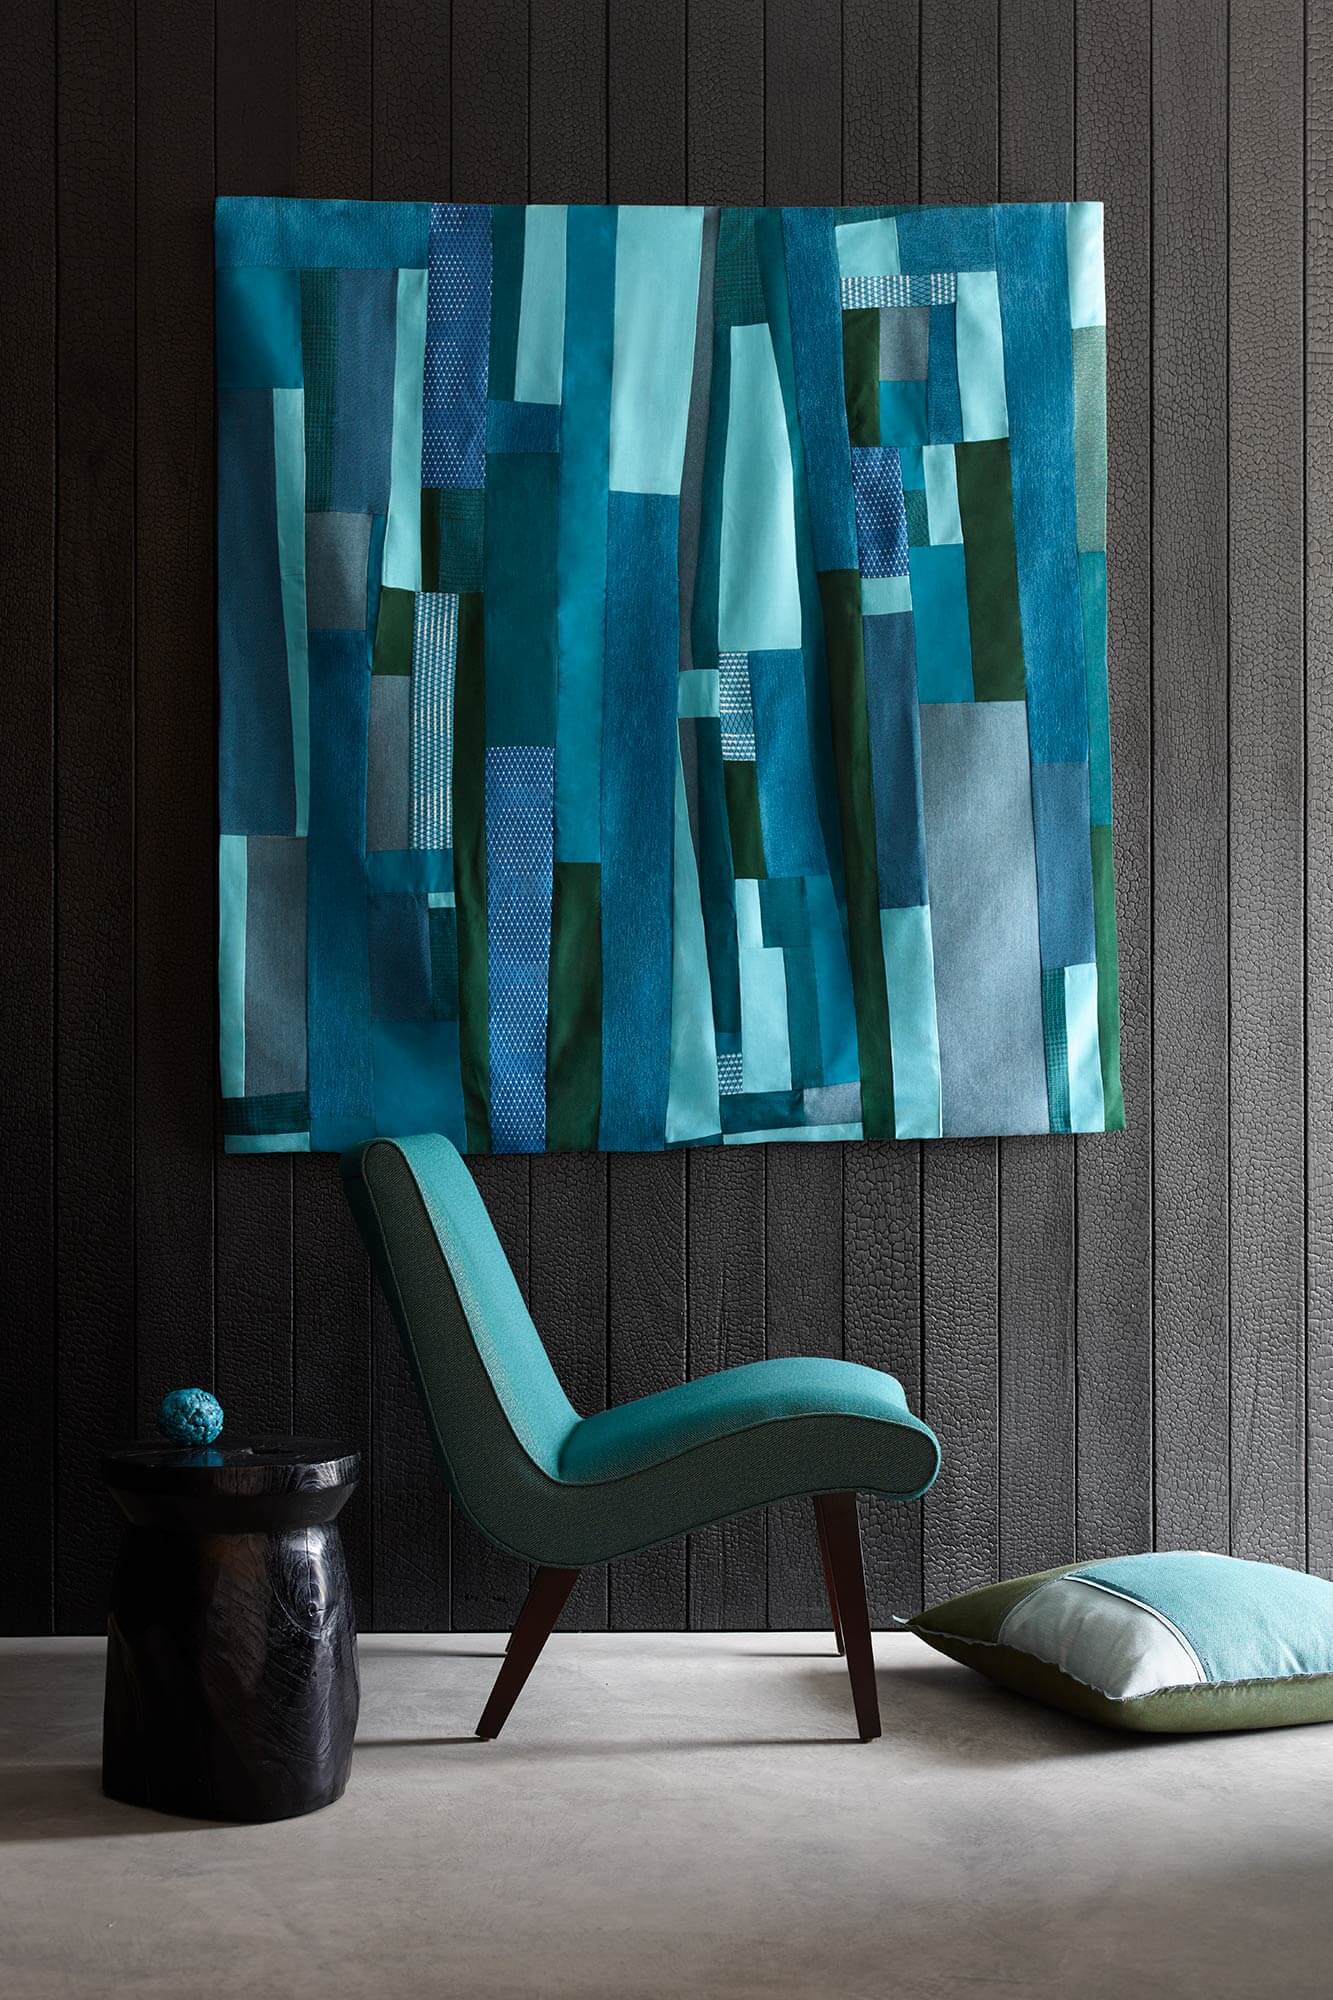 Teal upholstered armless chair with wall hanging featuring blue and green Sunbrella upholstery fabrics